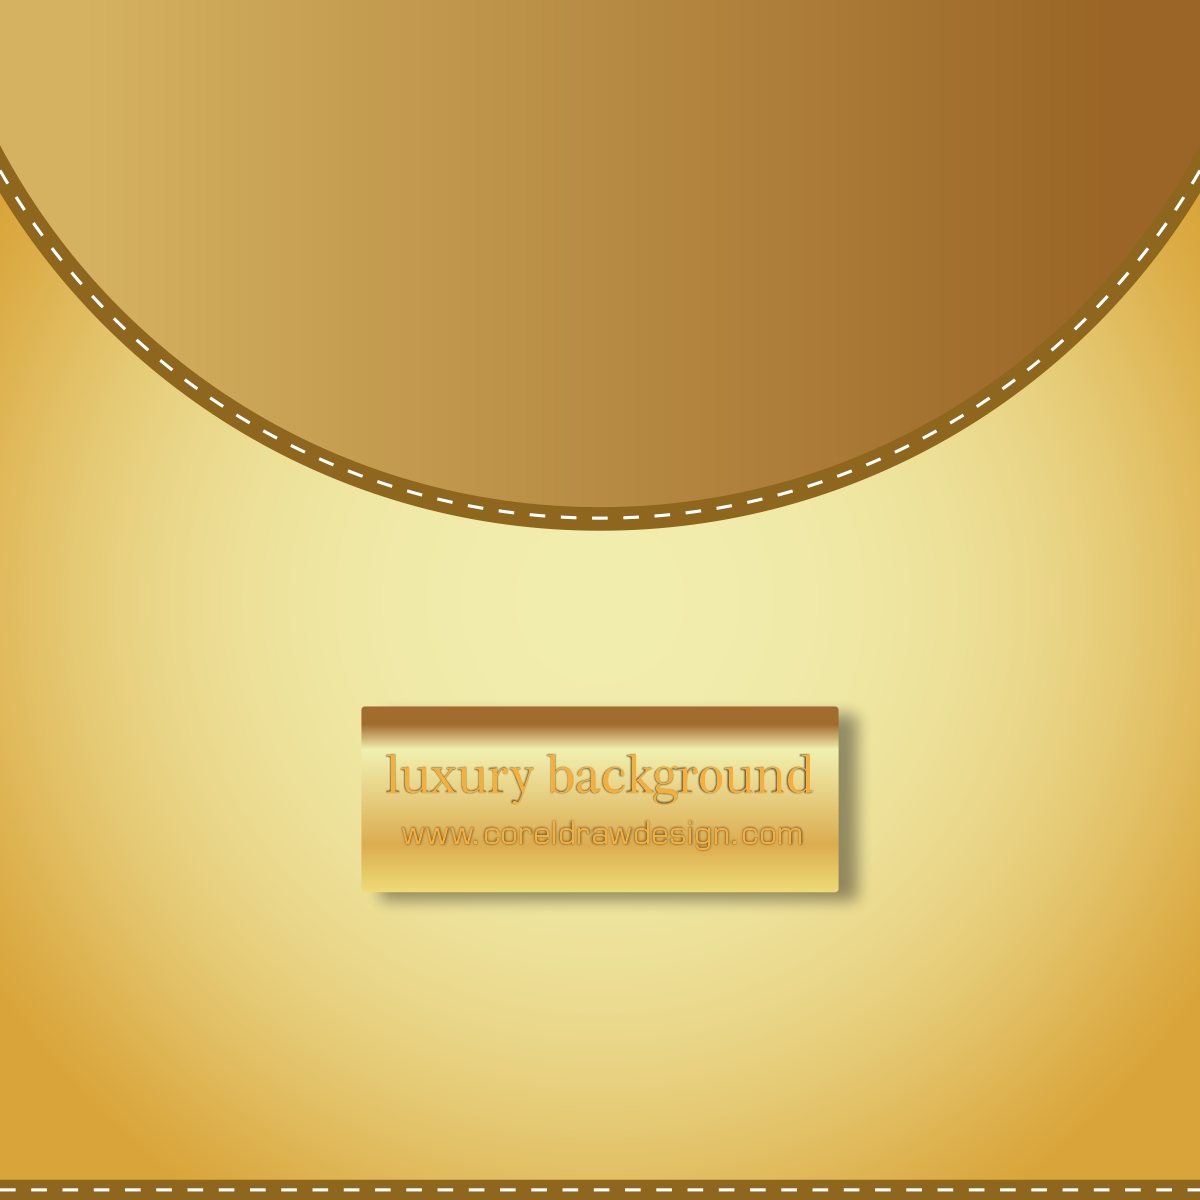 Luxury Background Golden Colour Free Vector